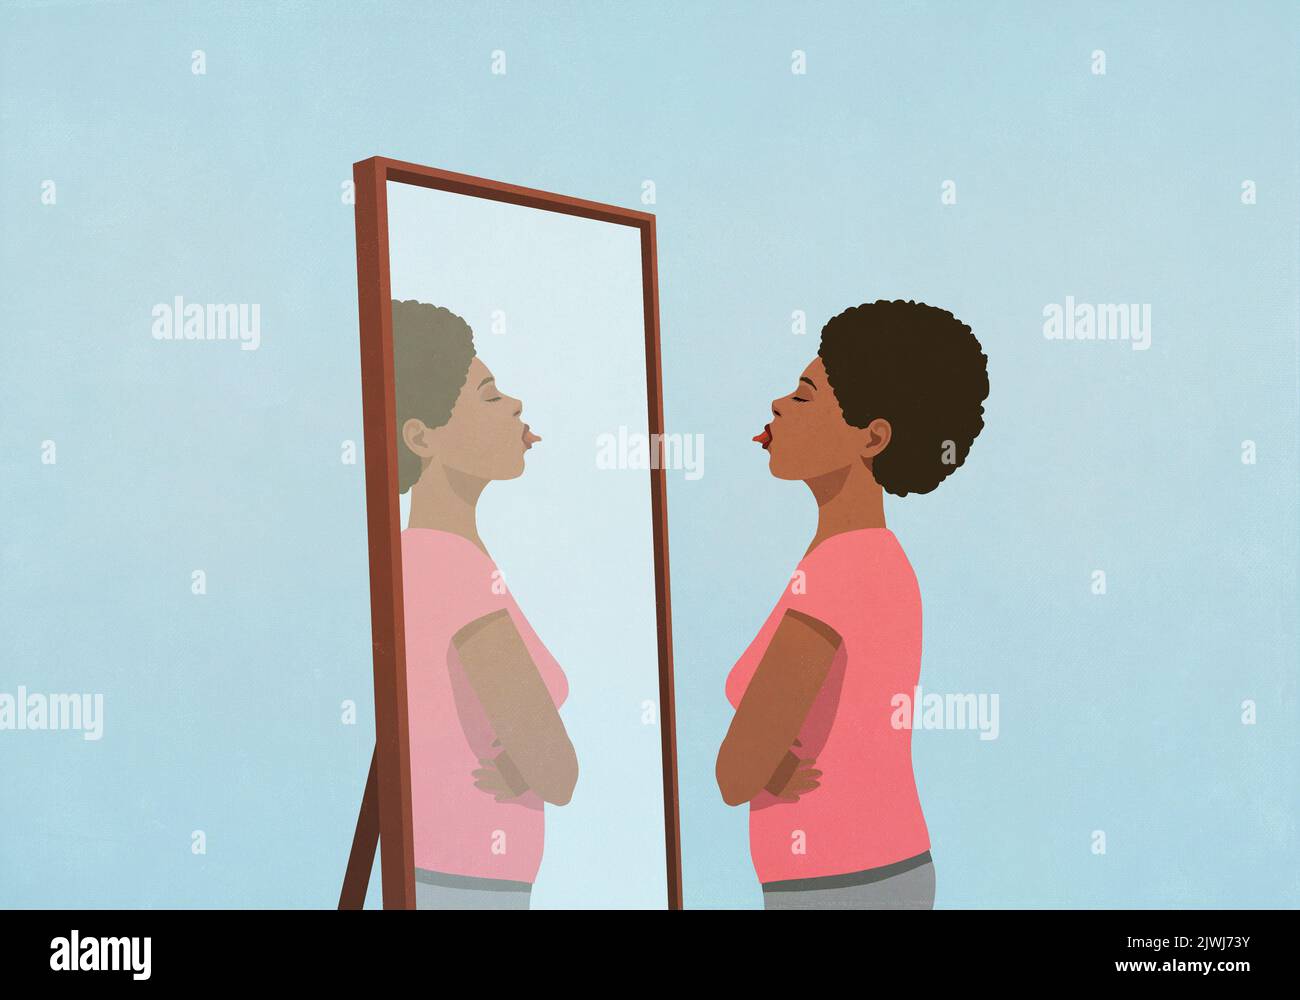 Woman sticking tongue out at mirror Stock Photo